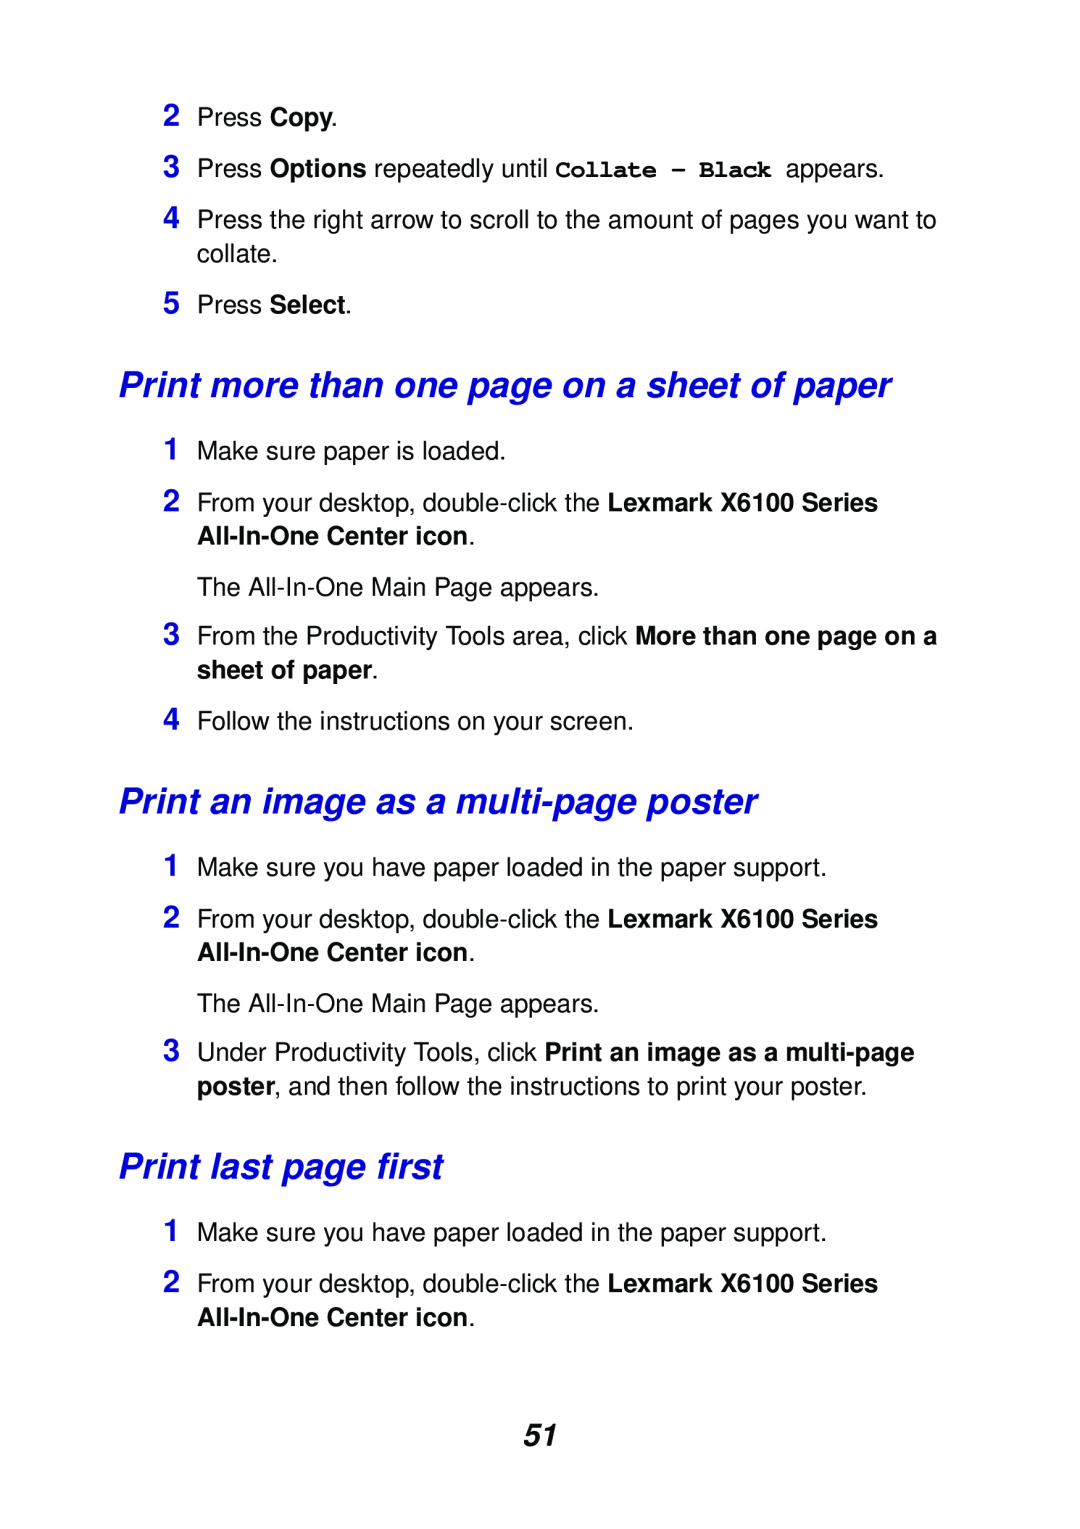 Lexmark X6100 Print more than one page on a sheet of paper, Print an image as a multi-pageposter, Print last page first 